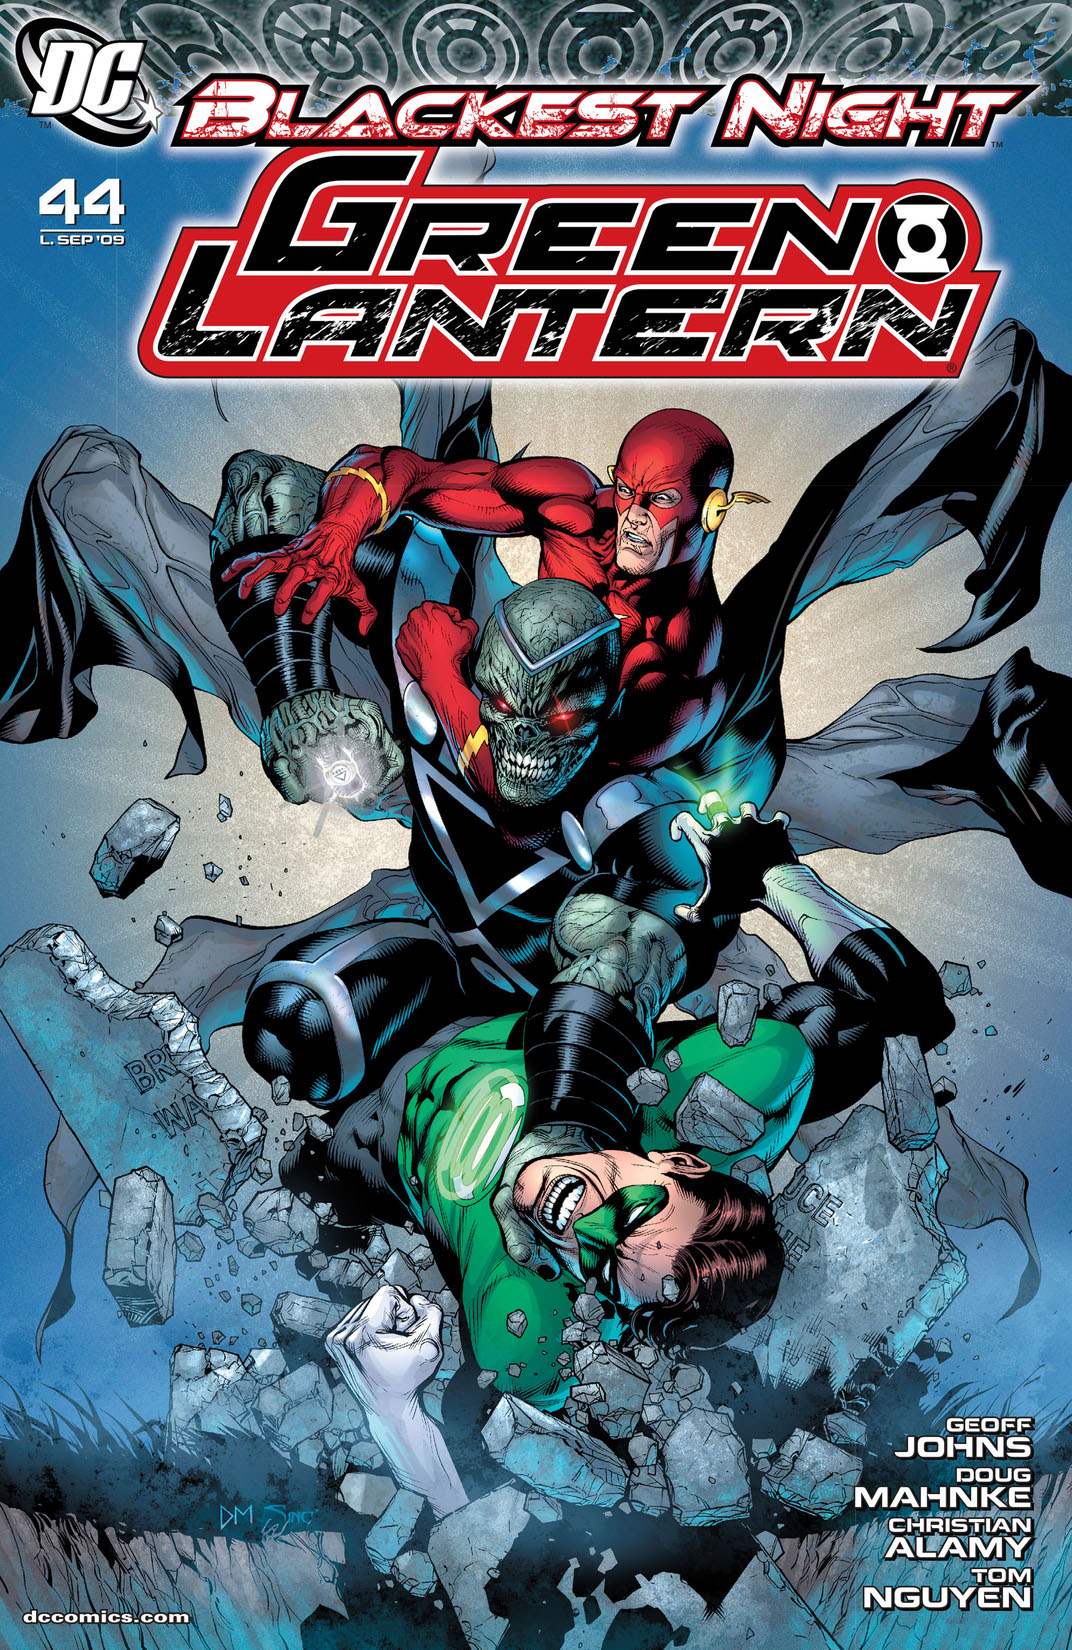 Green Lantern (2005-) #44 preview images